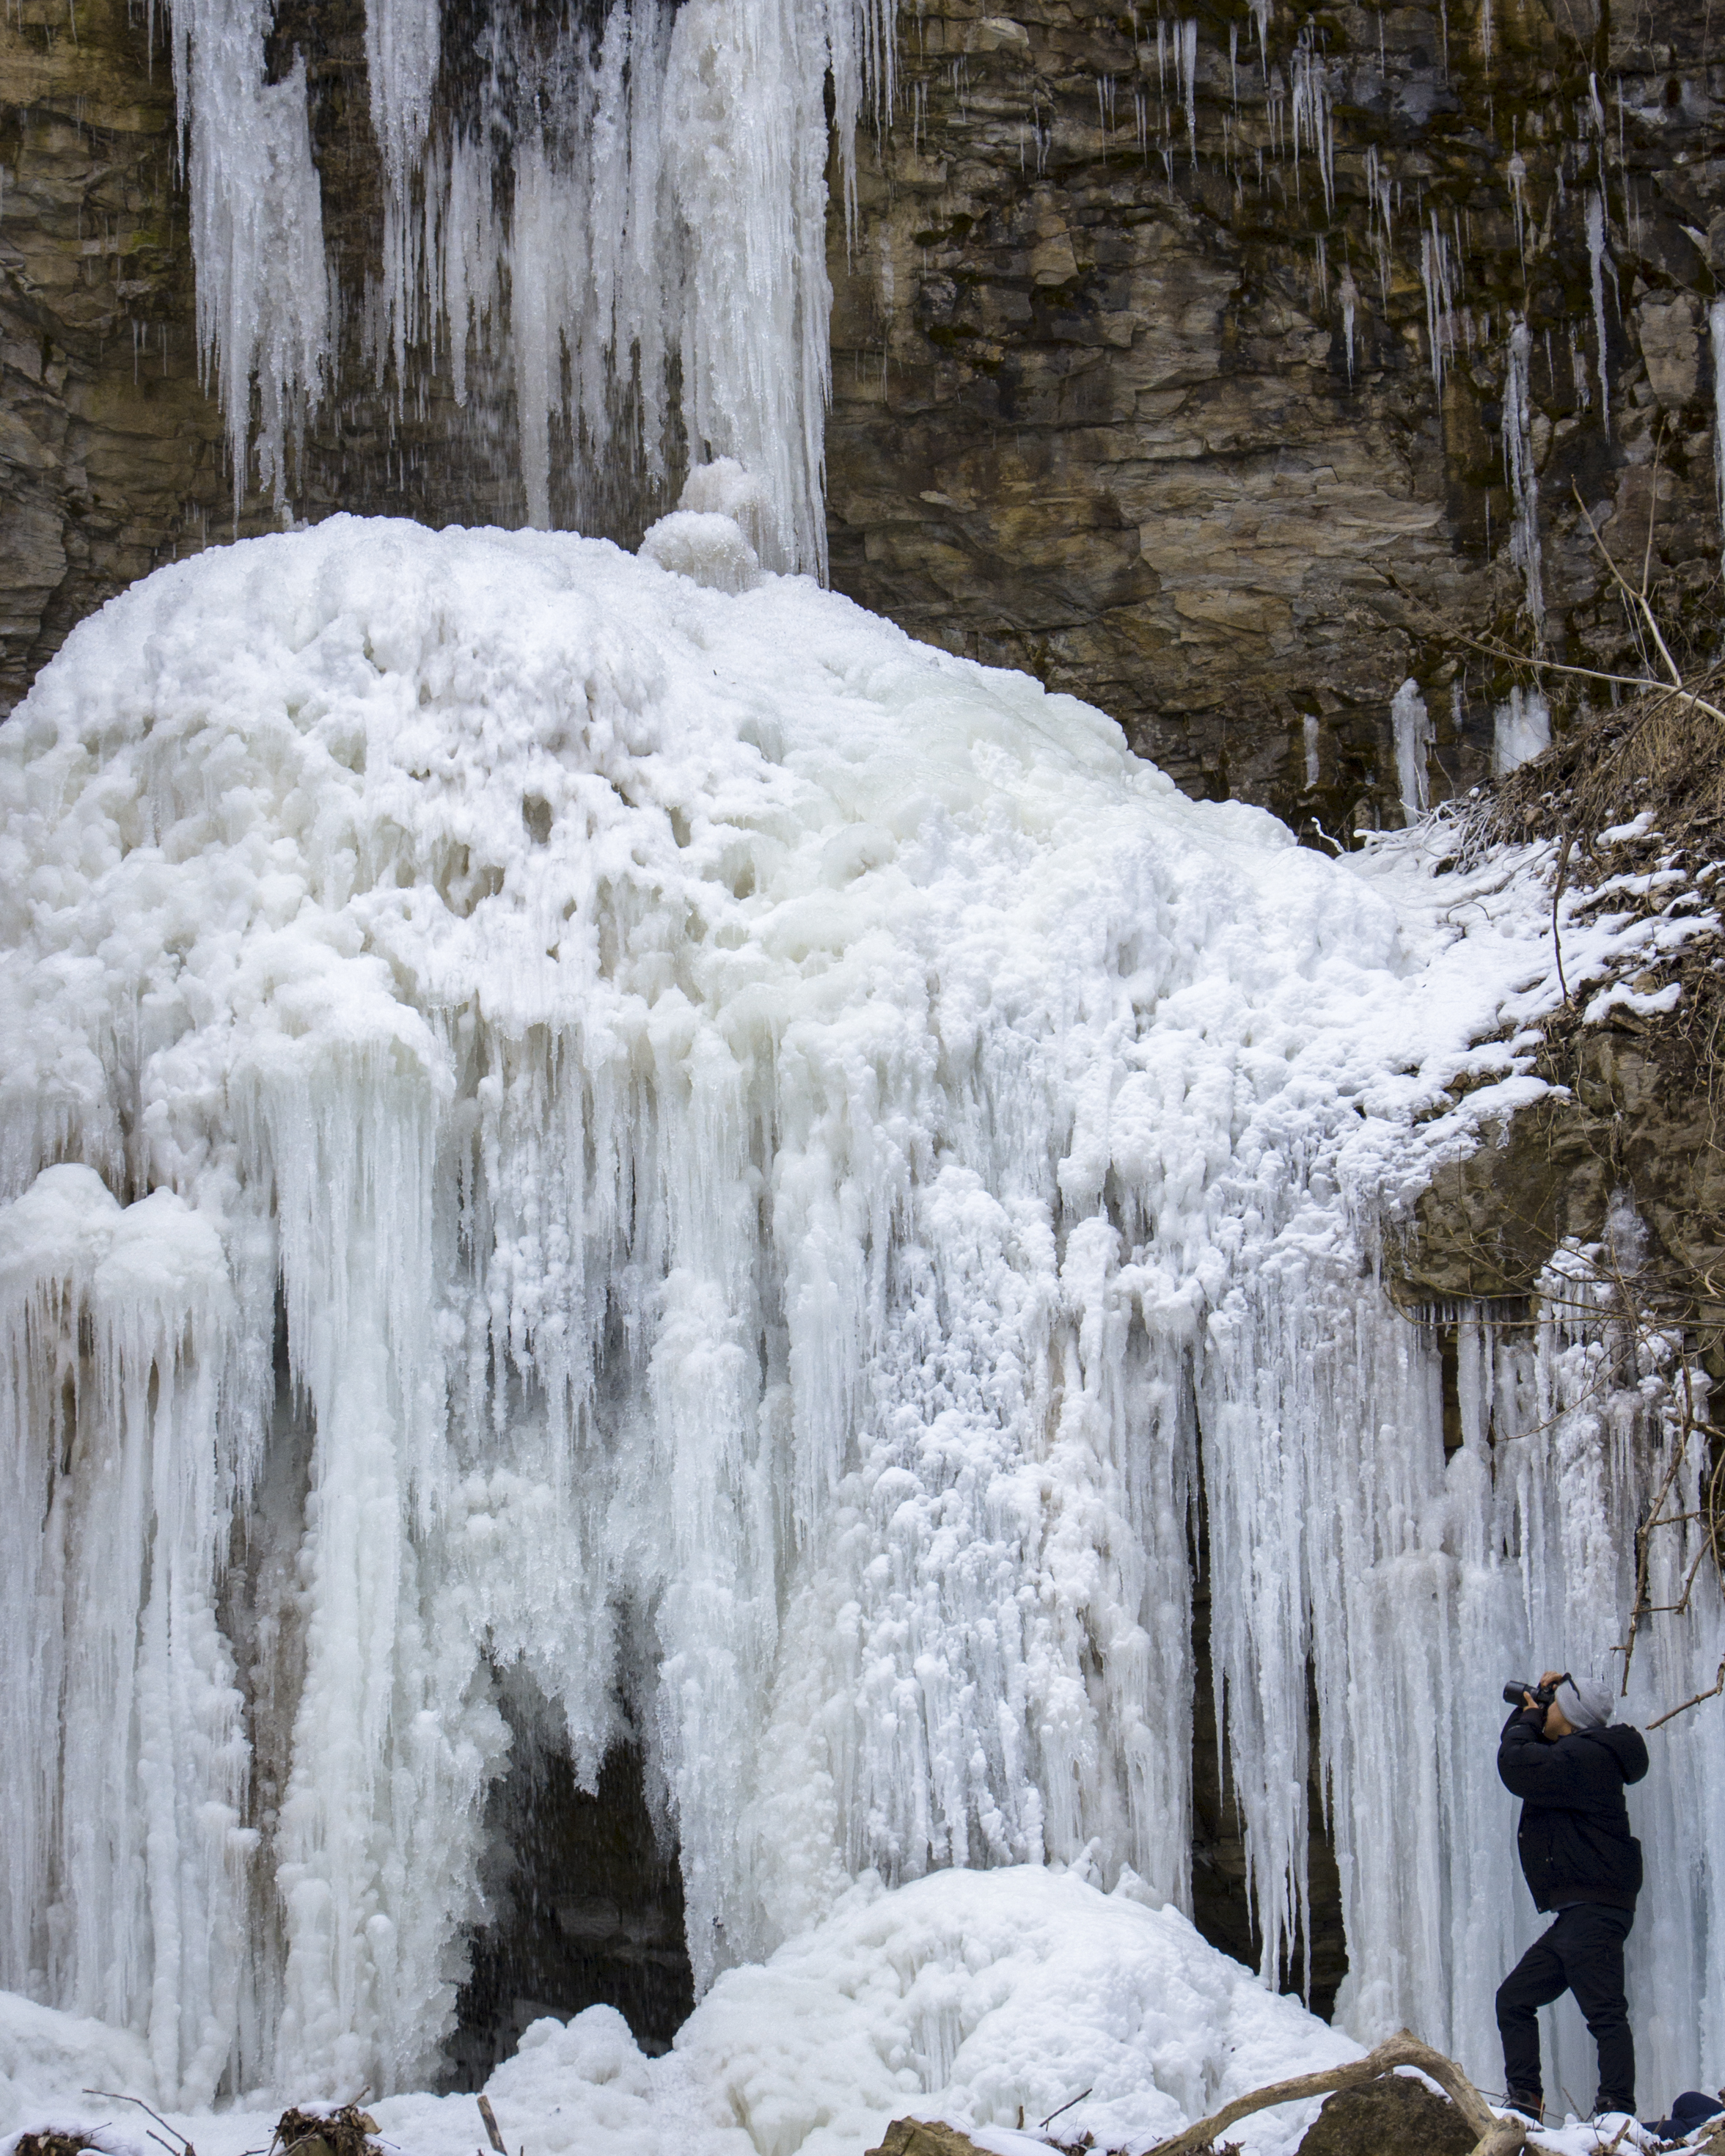 A frozen waterfall with large icicle formations